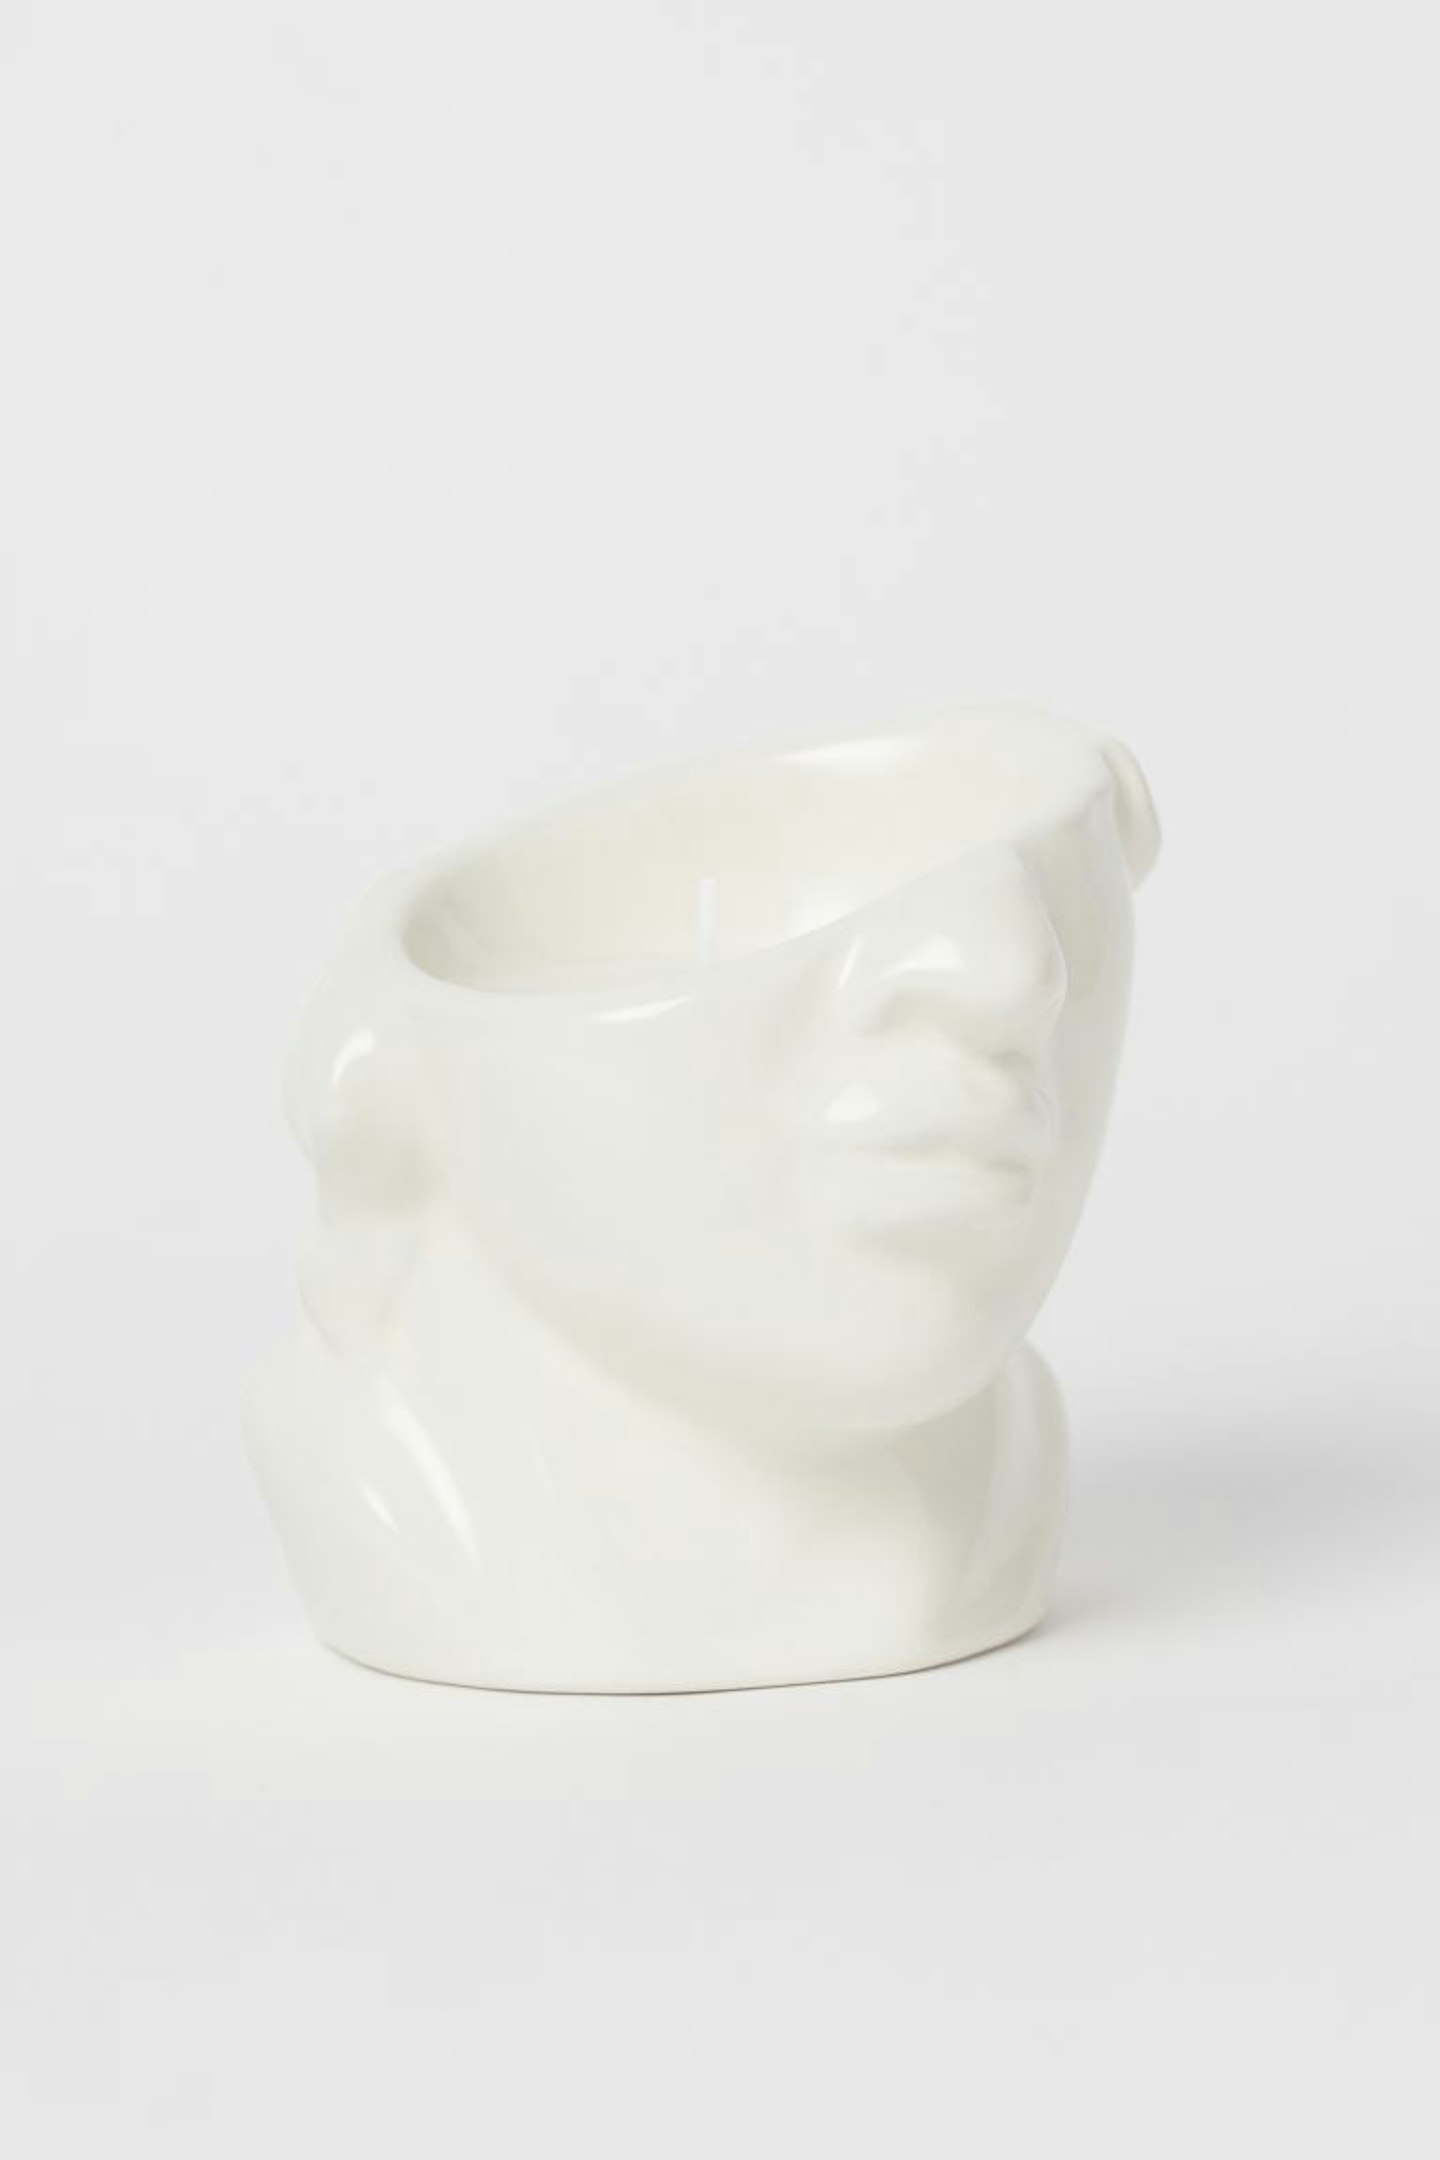 H&M, Scented candle in a holder, £8.99